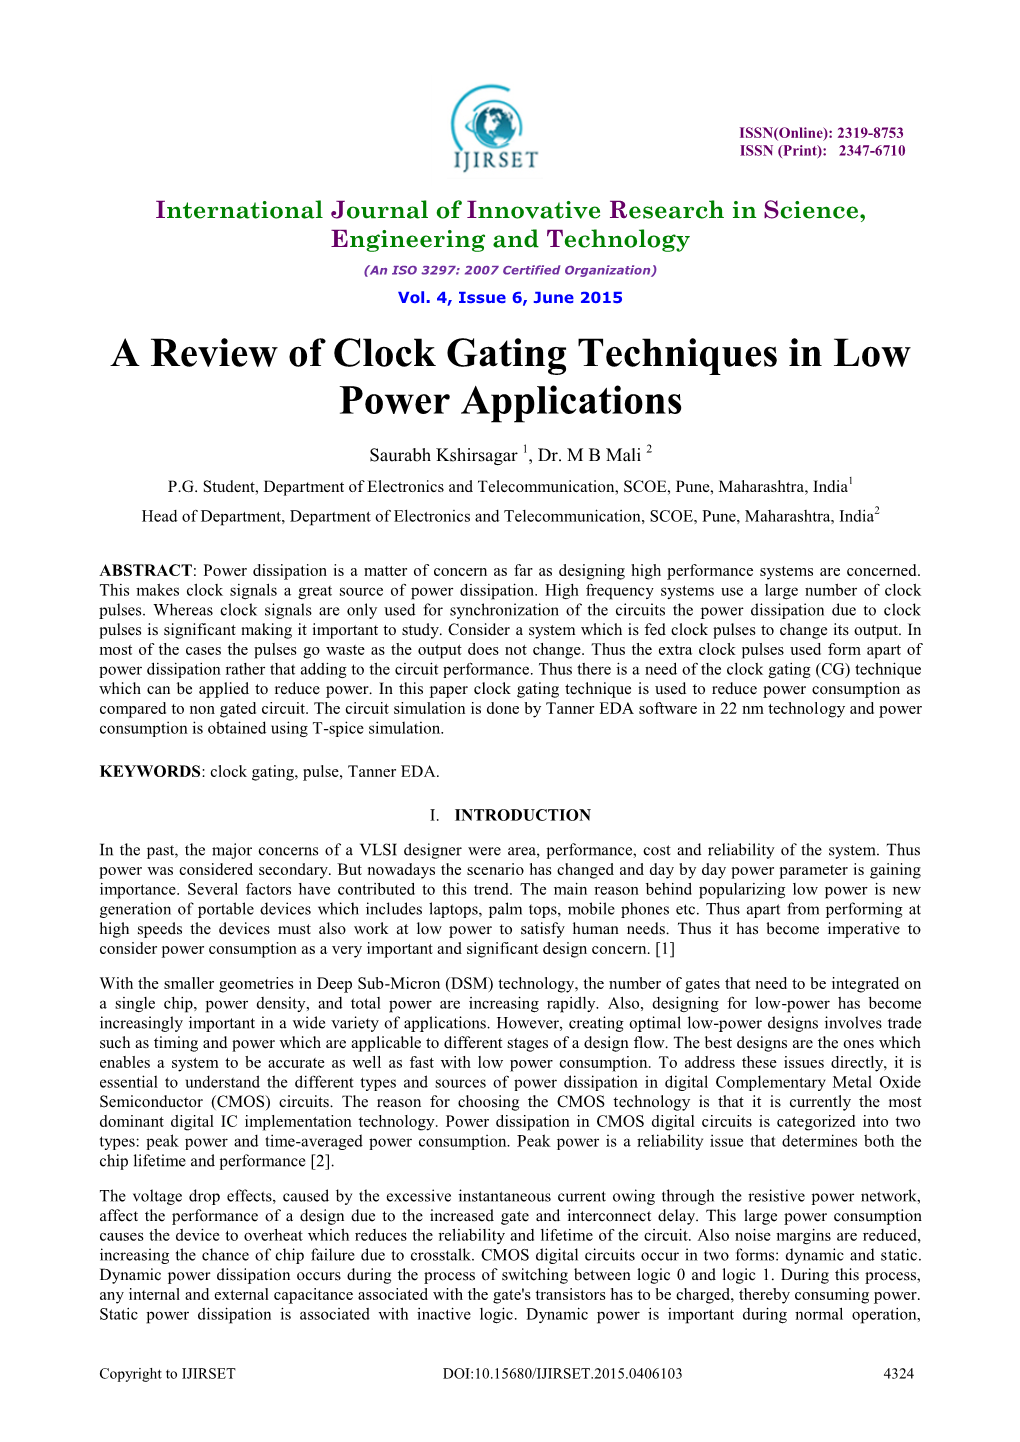 A Review of Clock Gating Techniques in Low Power Applications